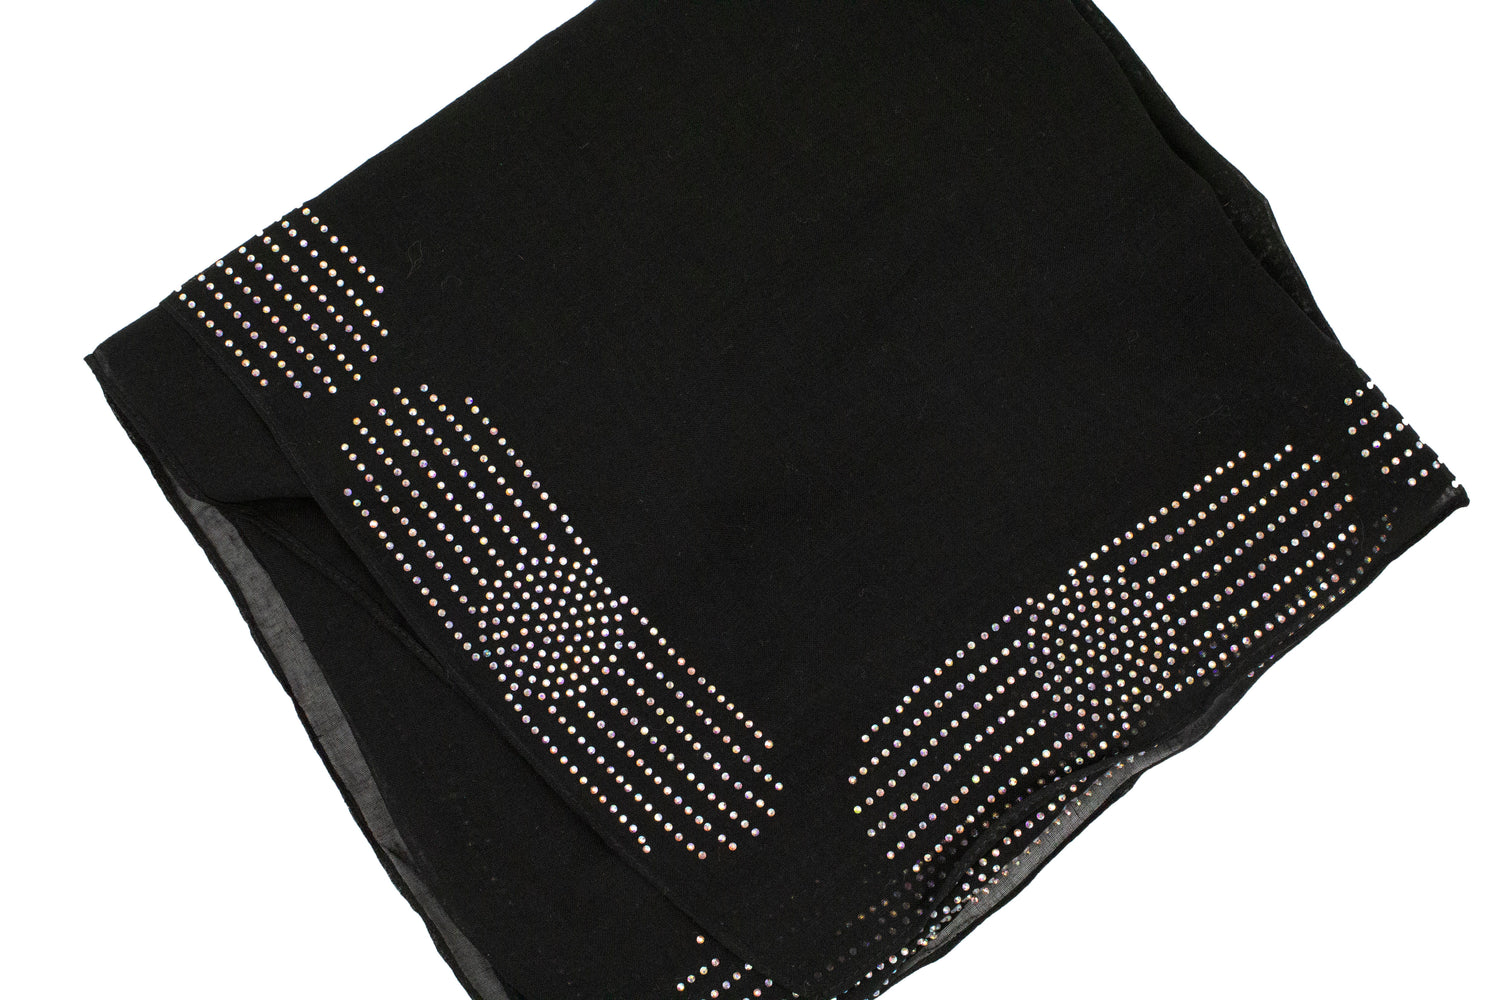 black square hijab embellished with jewels in a circle pattern on the edges